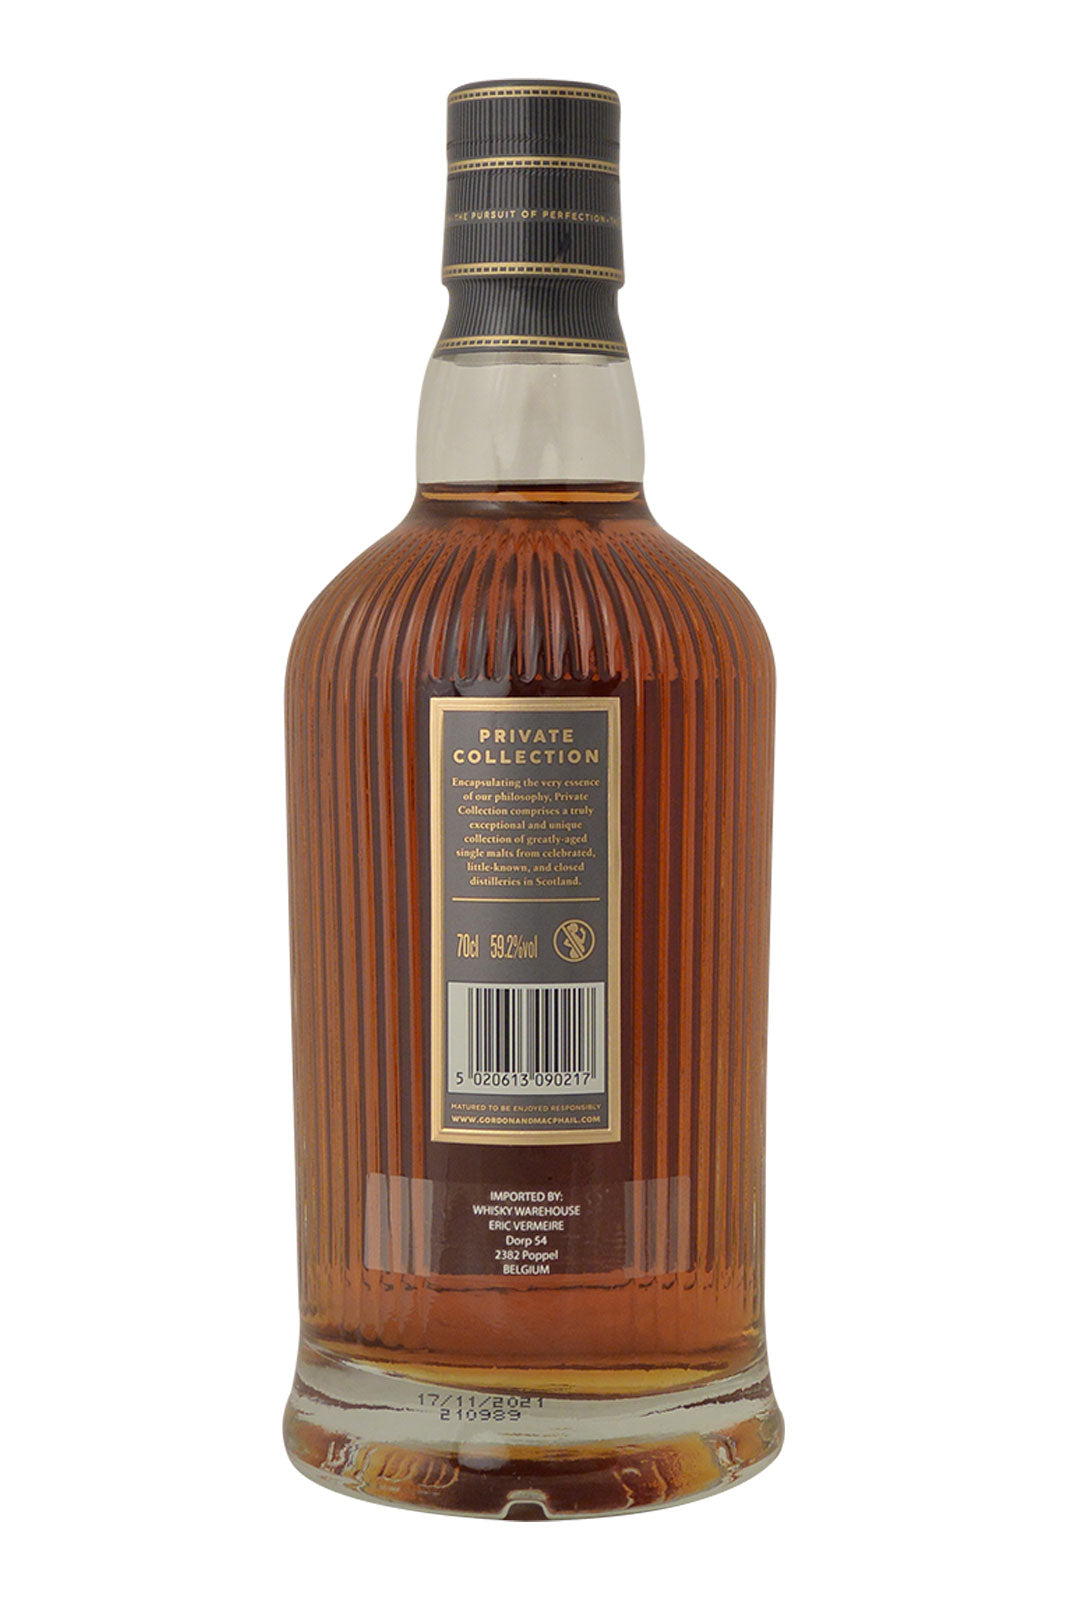 Speyburn 1977 44 Year Old Gordon & MacPhail Private Collection